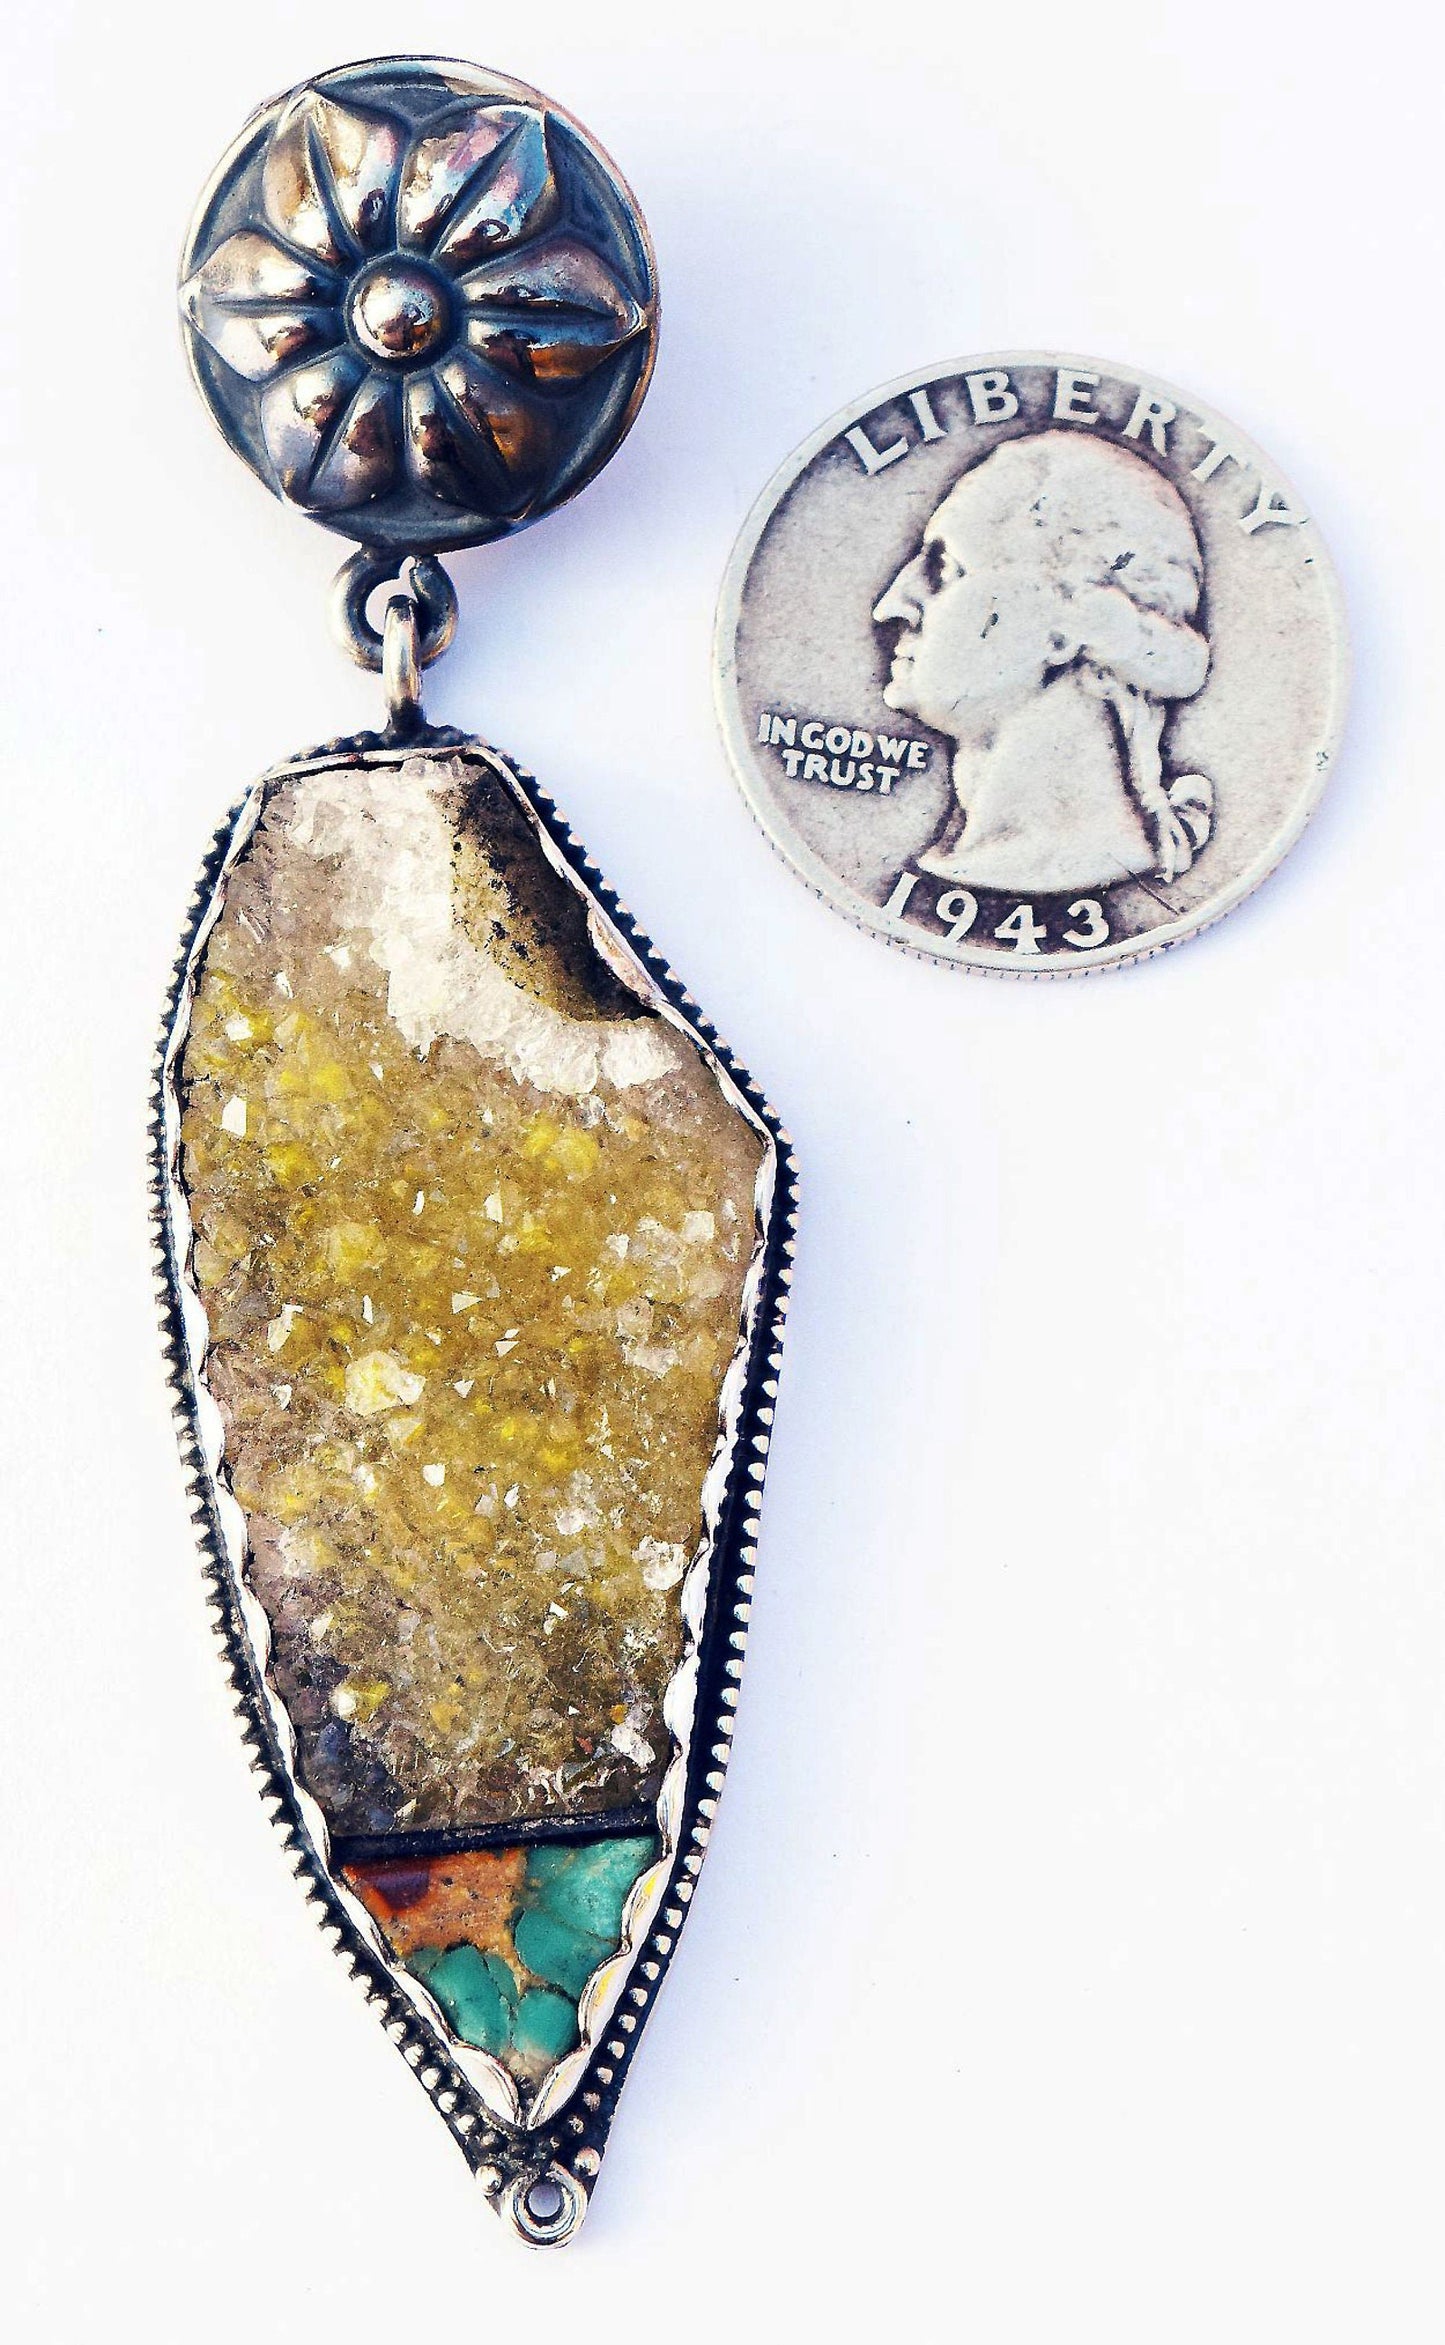 EXTREMELY RARE! Natural plate of lemony Citrine crystals, combined with natural Royston turquoise in a hand made pendant!